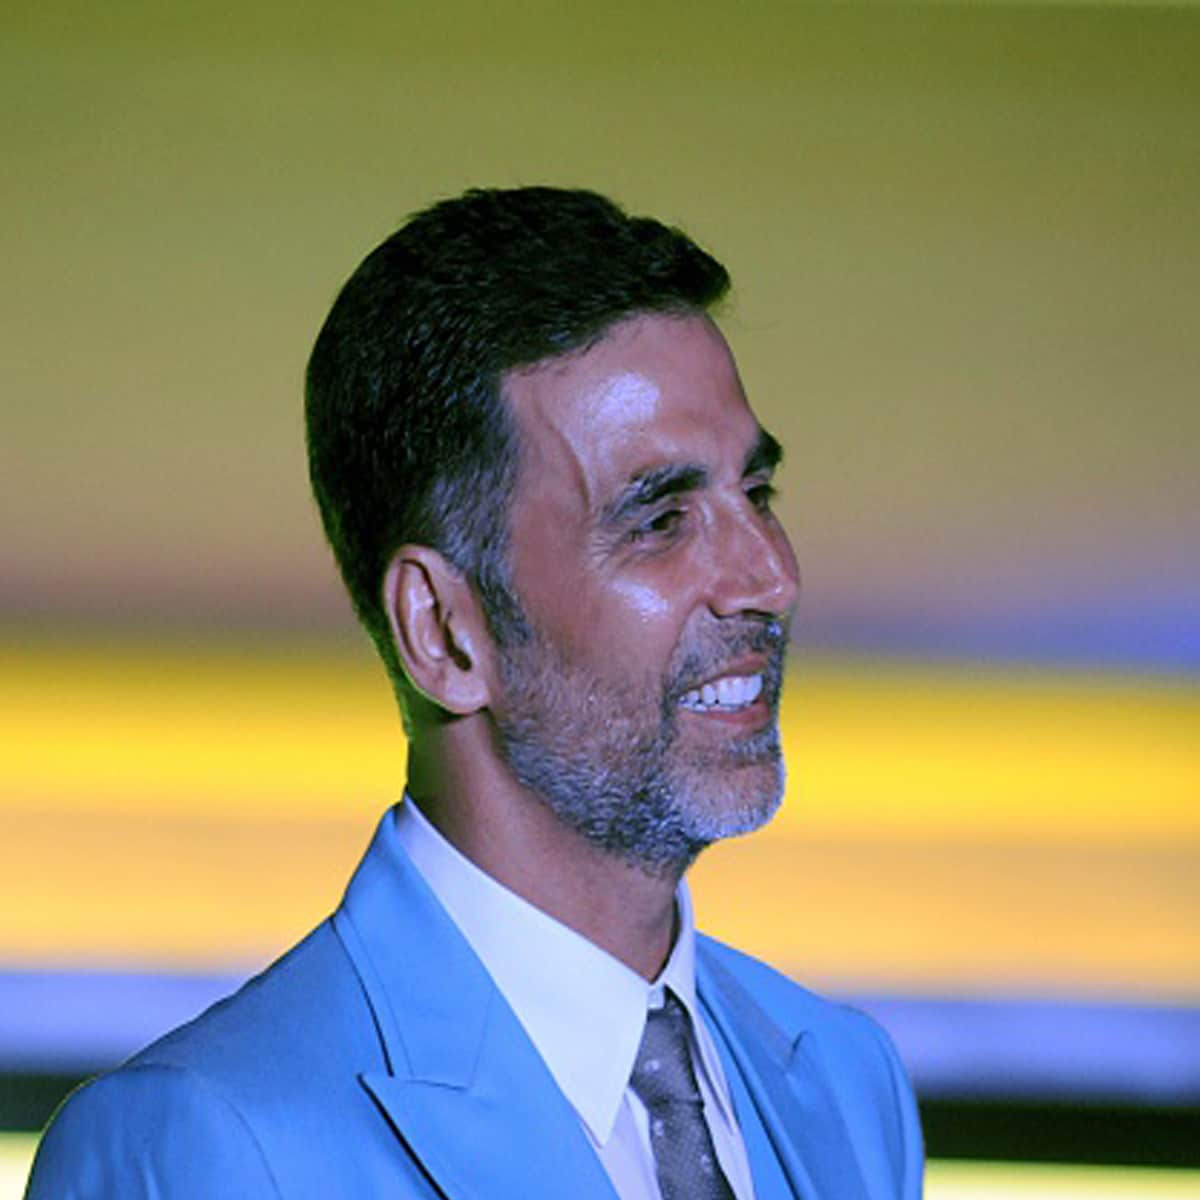 actor akshay kumar poses during a promotional event for india luxury style